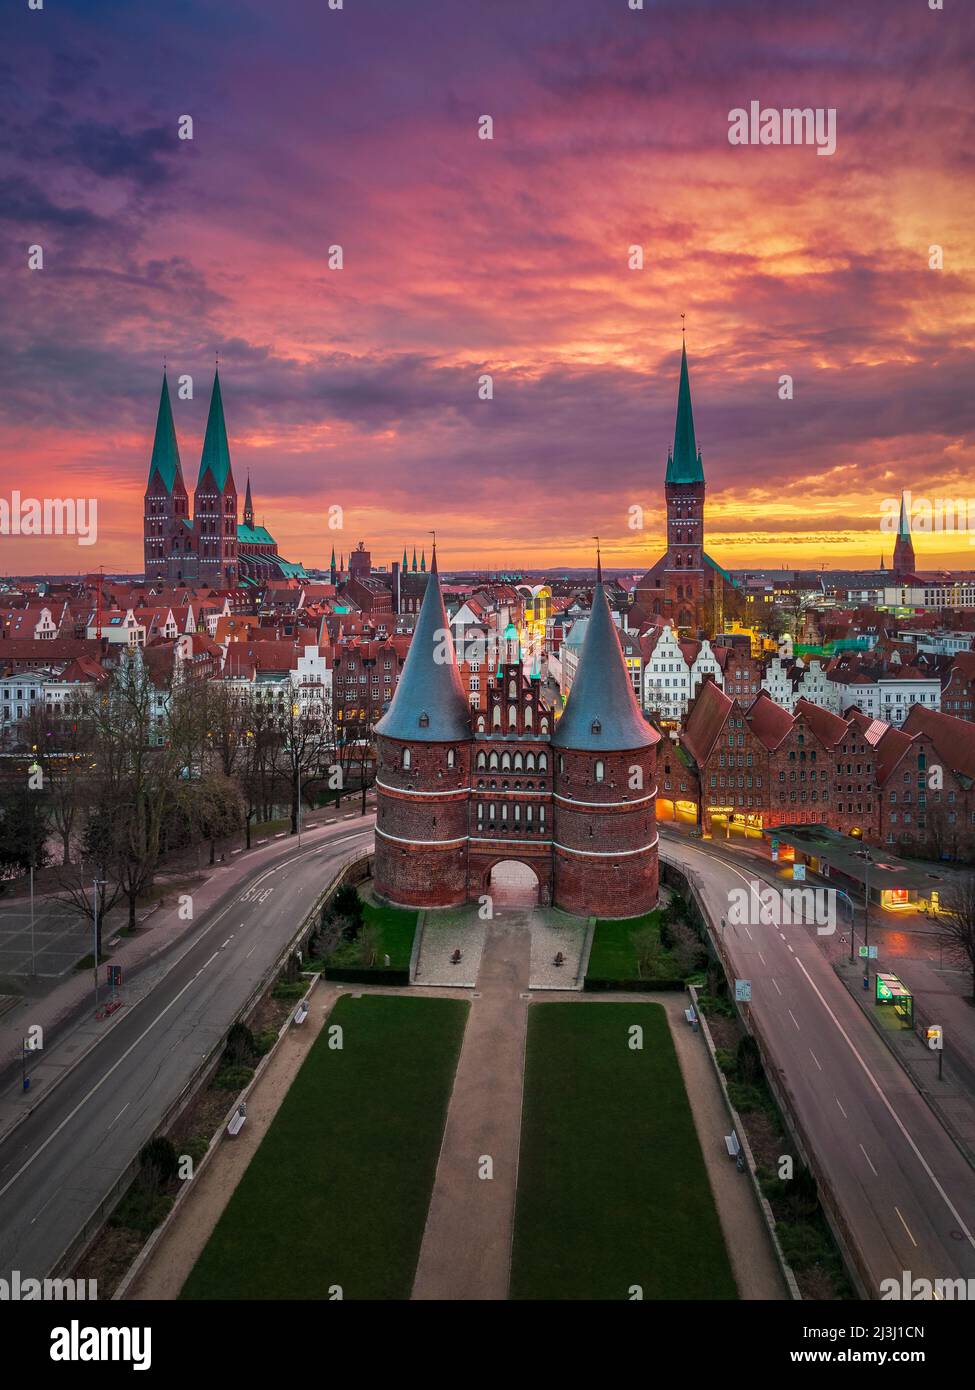 Sunrise at the Holsten Gate (Holstentor) in Lubeck, Germany Stock Photo